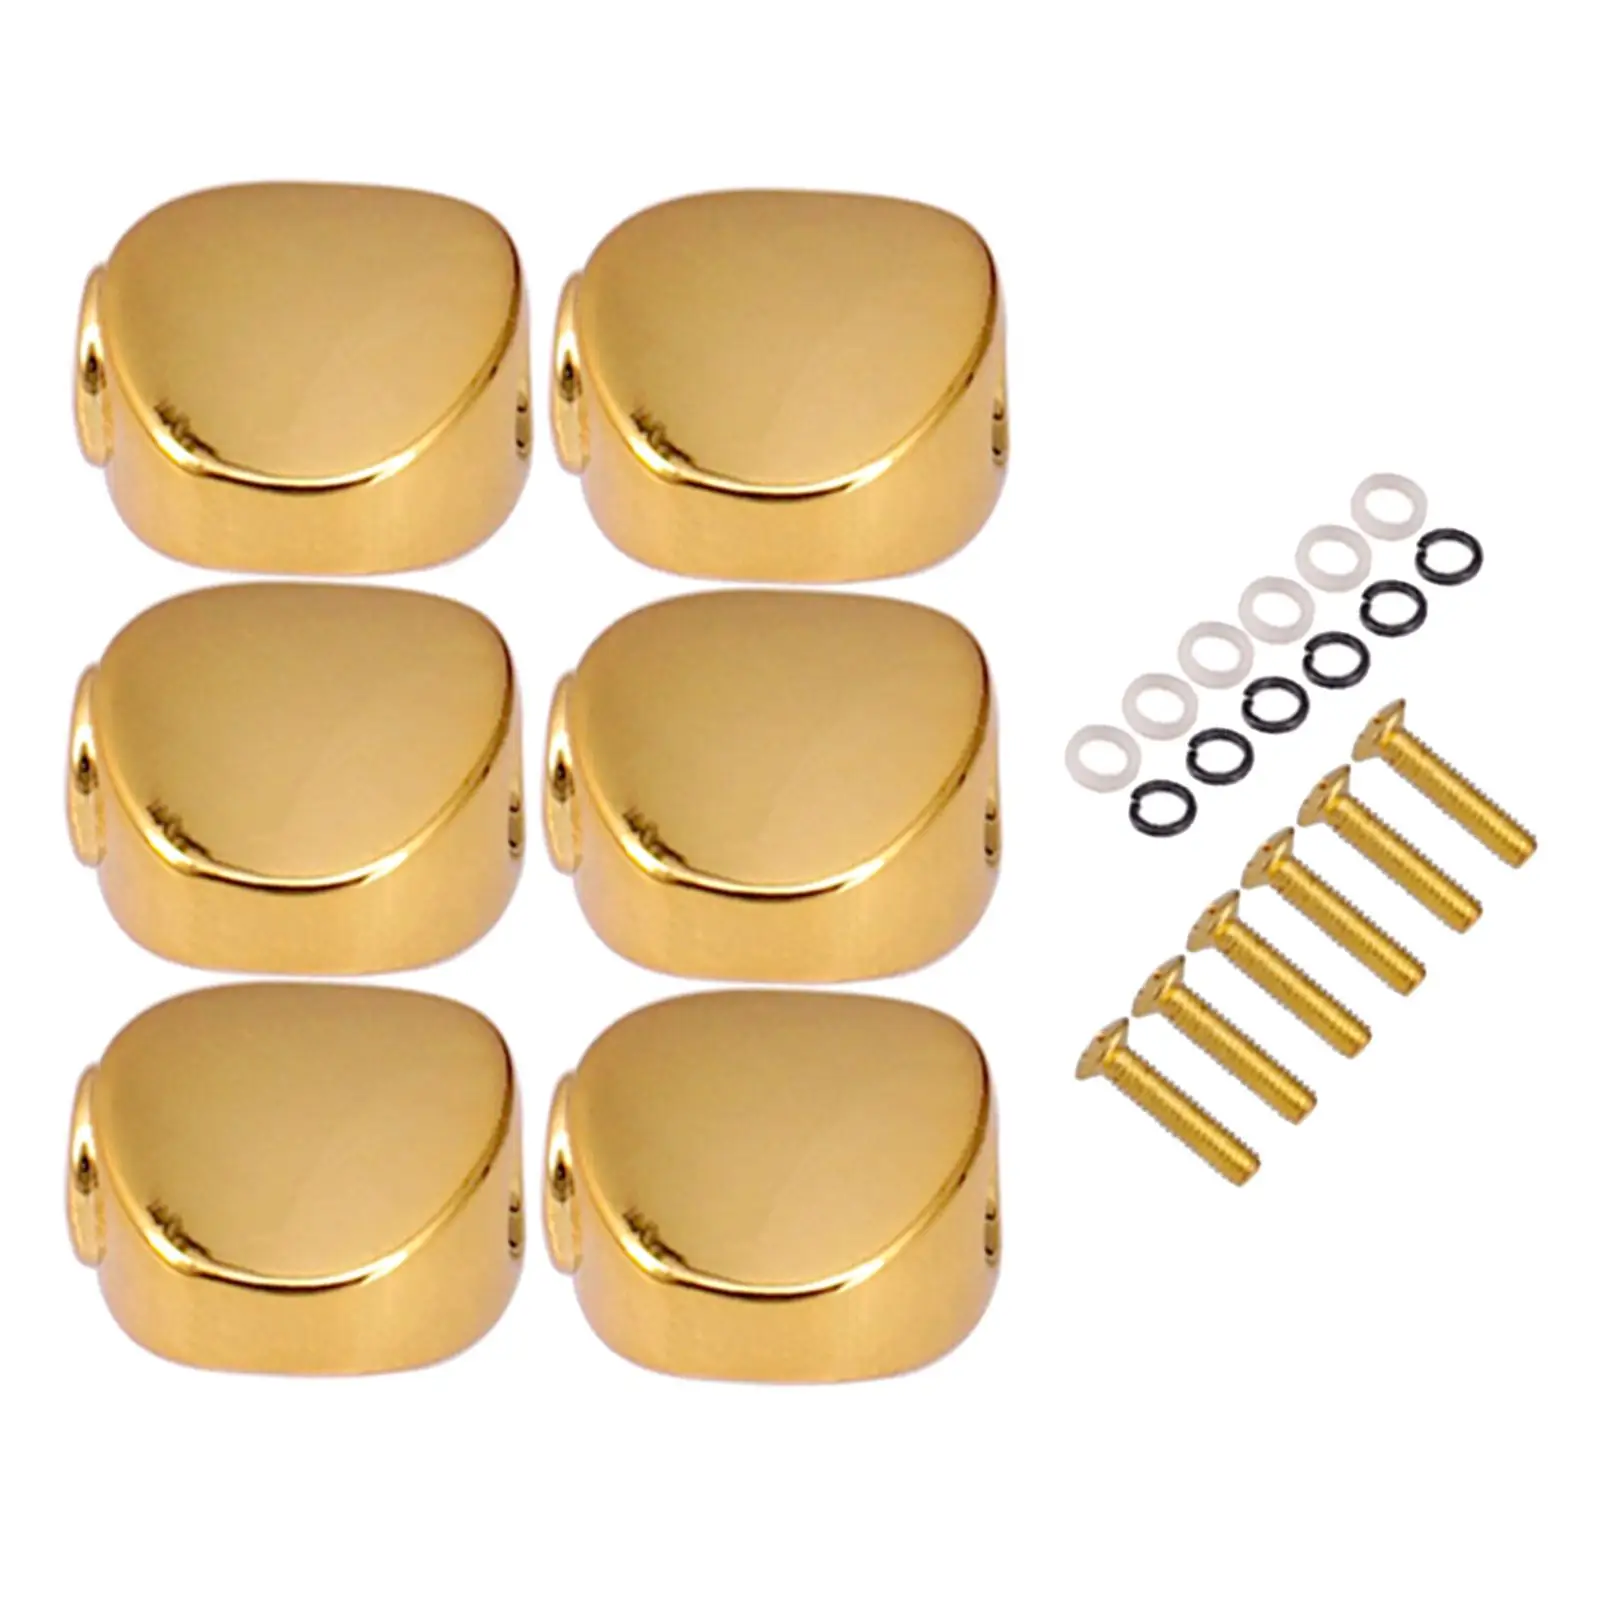 6pcs Guitar Tuning Pegs Caps Machine Head Classical Guitar Replacement Buttons Knobs for Acoustic Folk Guitar